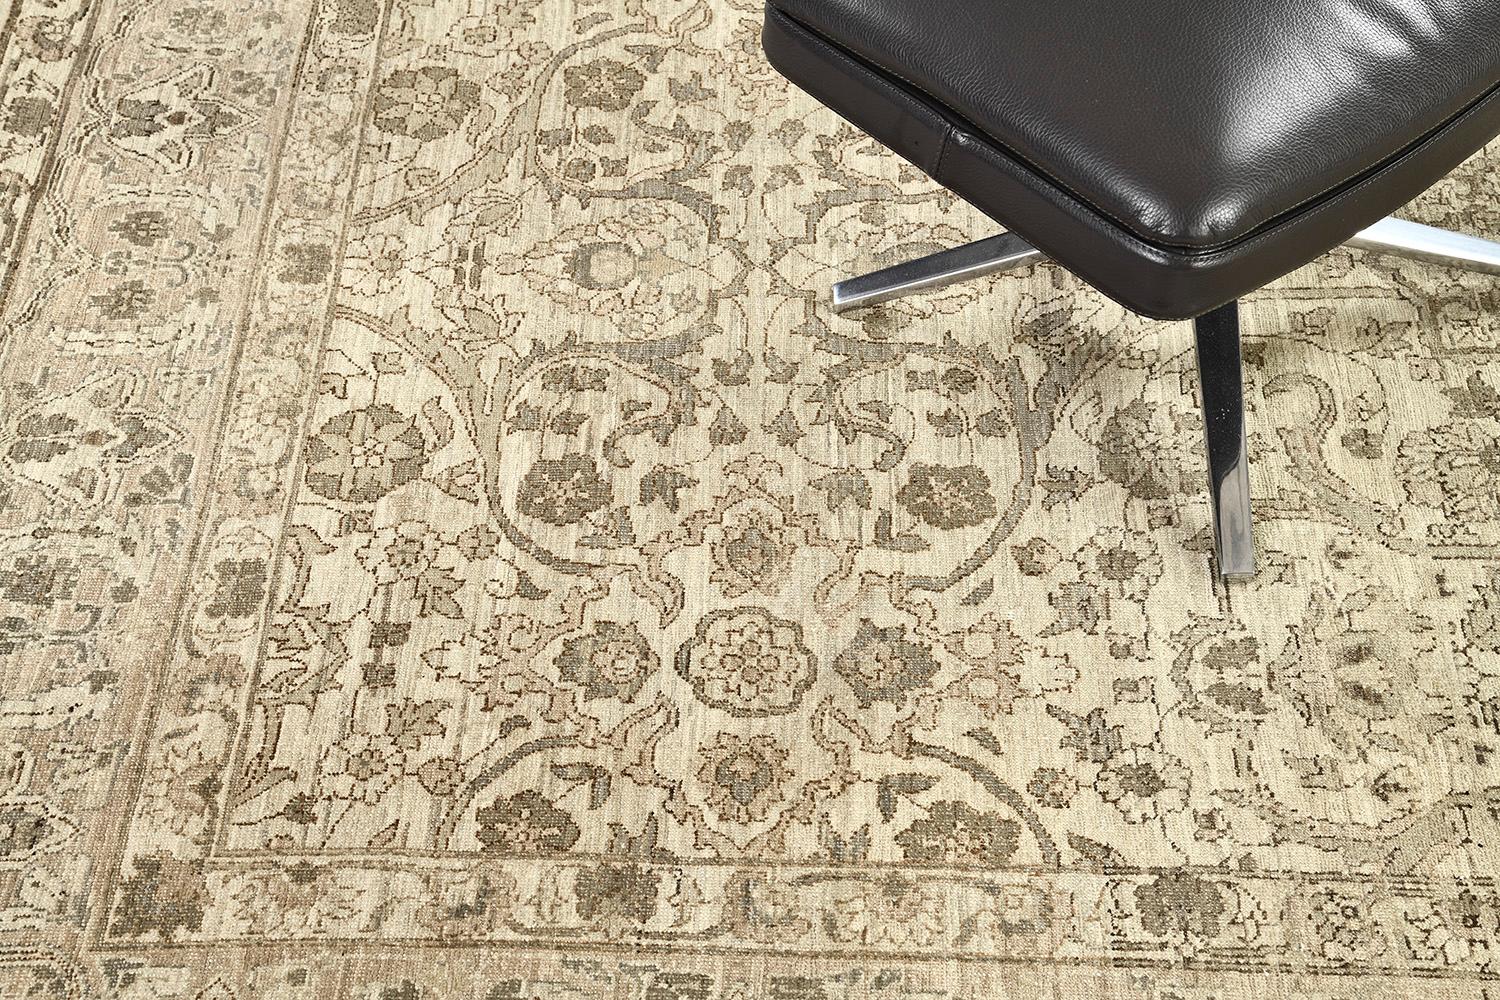 A laudable recreated vintage style Tabriz rug features blooming elements that intensify into a camel field. The main border contains an all-over lattice of issuing split leaves, mini palmettes, and a delicate flowering vinery that makes the rug more